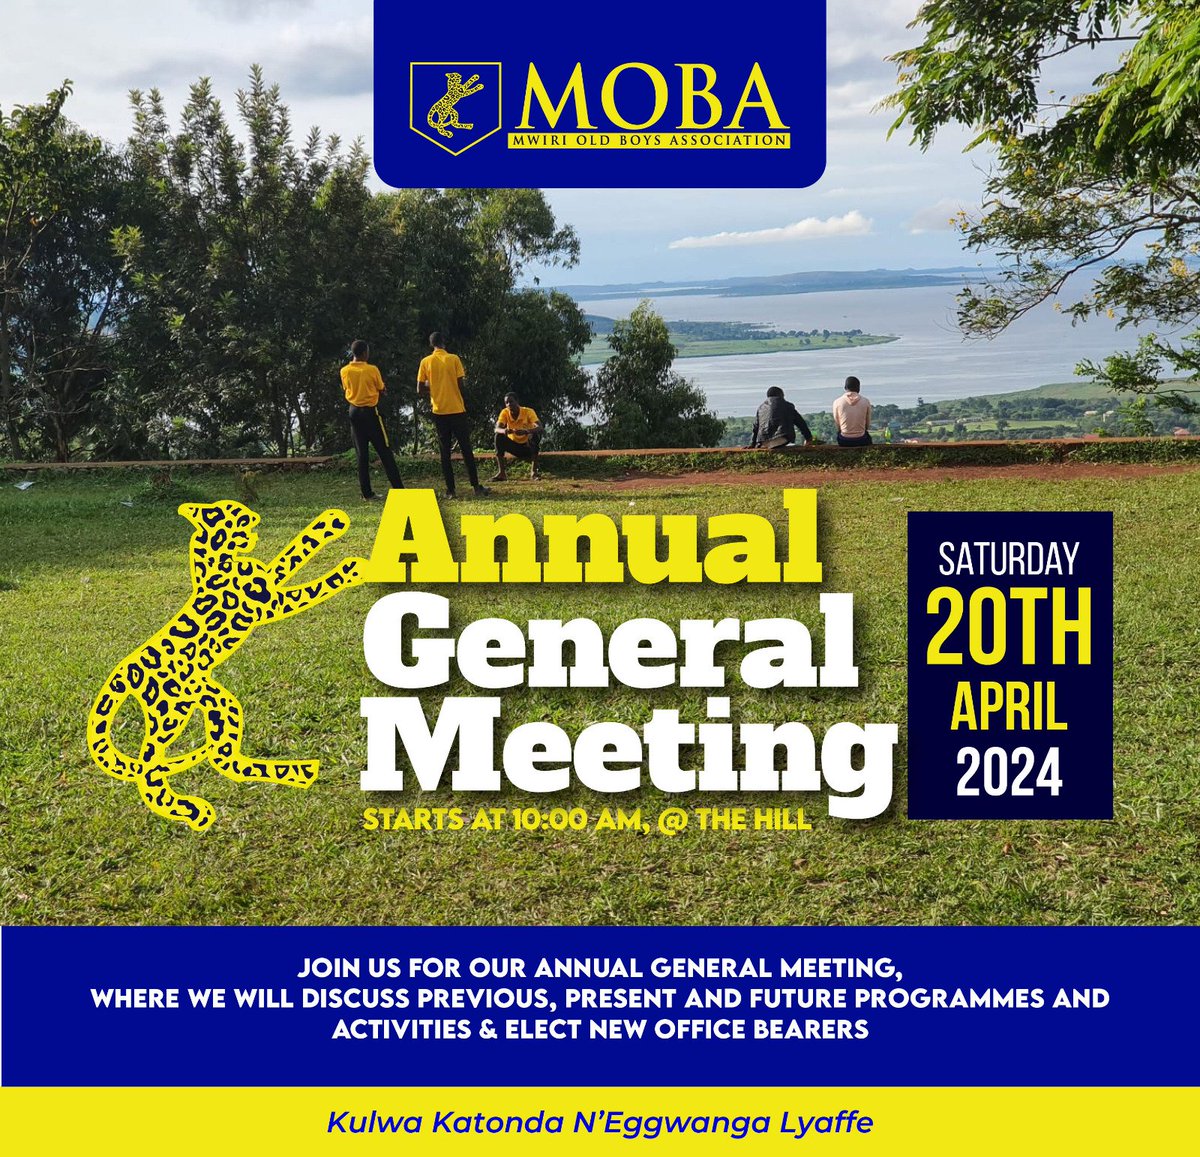 📌 Join us on Saturday 20th April, 2024 for our Annual General Meeting . We look forward to having you.